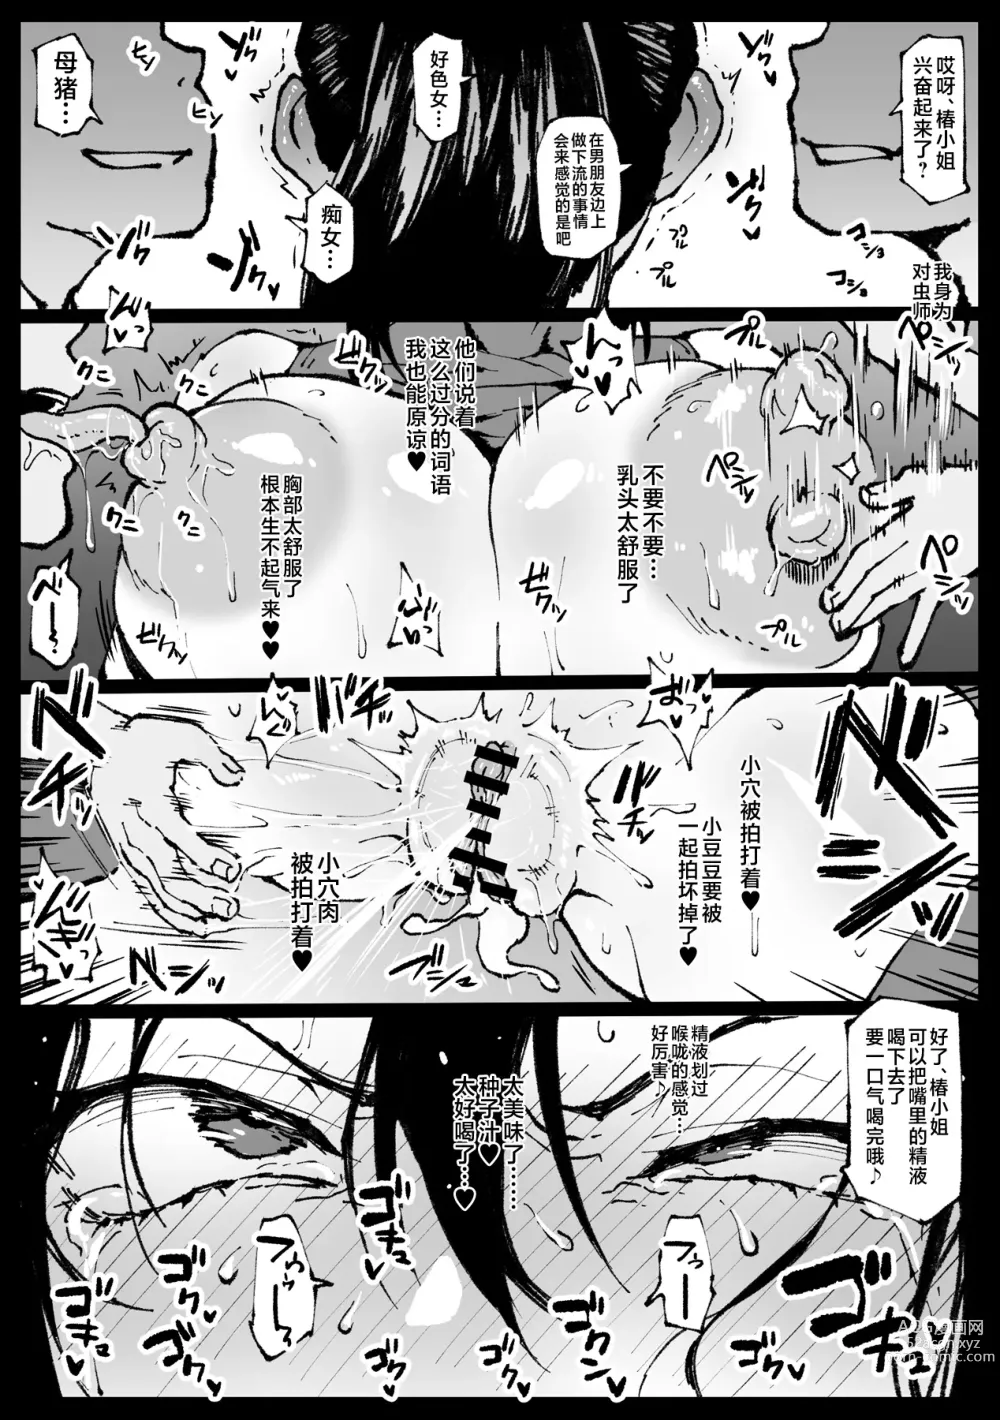 Page 13 of doujinshi Tsubaki-san called during a date